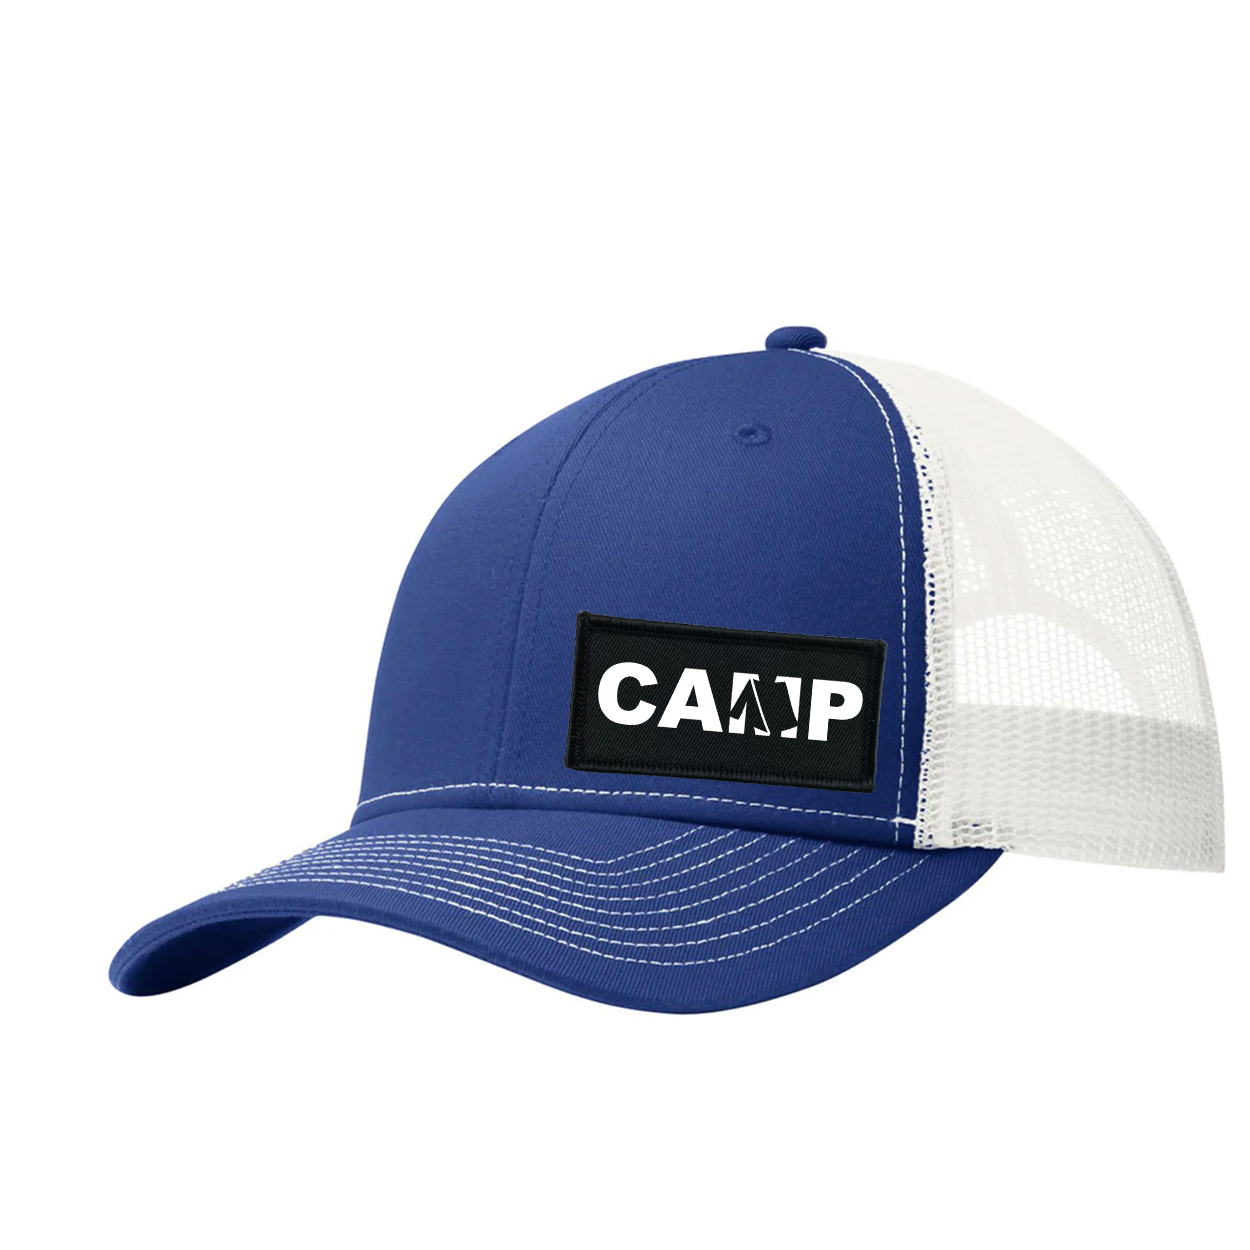 Camp Tent Logo Night Out Woven Patch Snapback Trucker Hat Dark Royal/White 